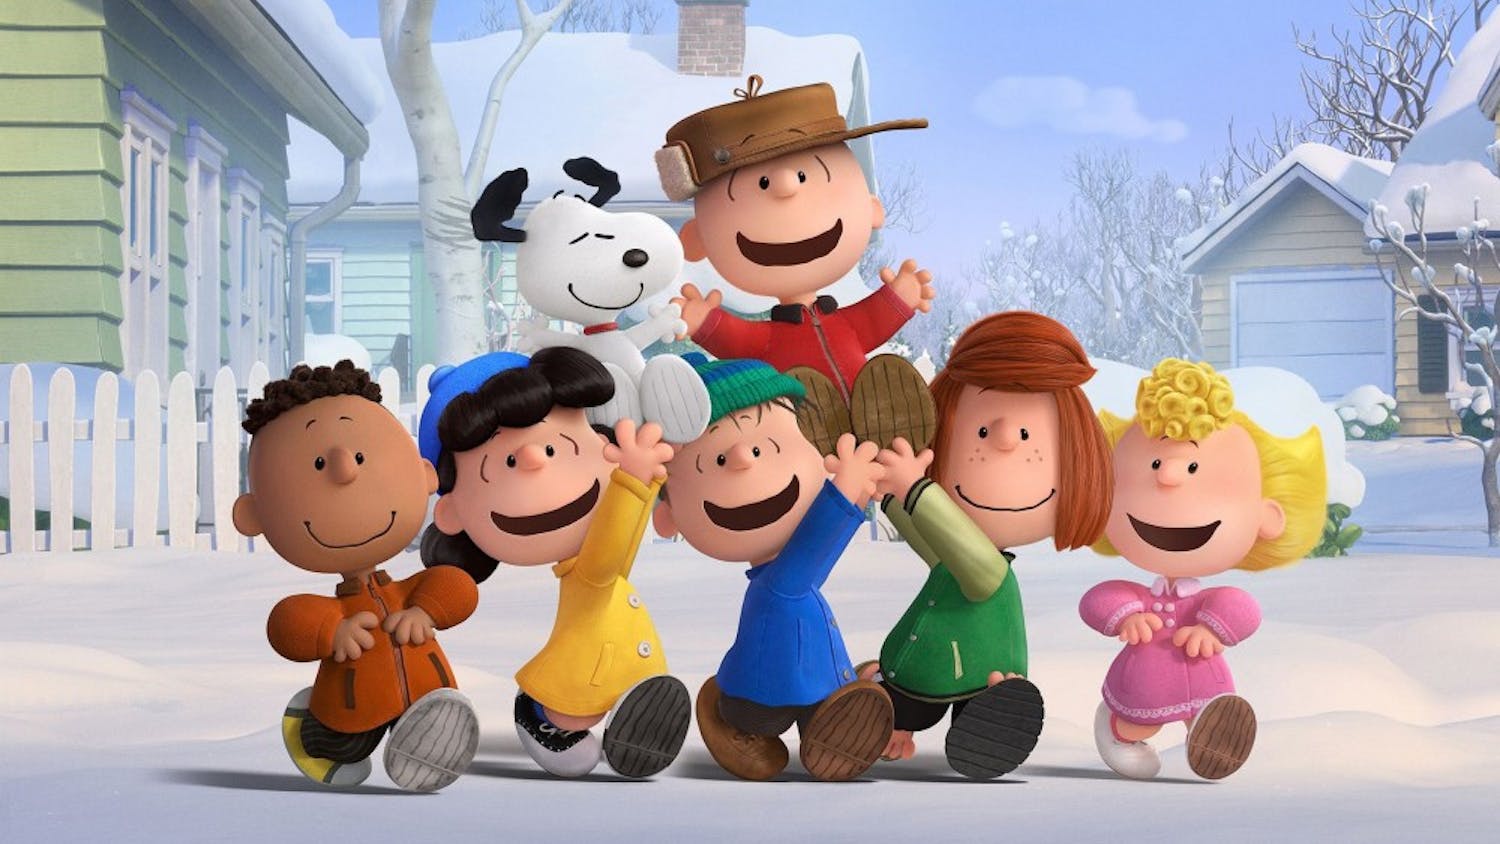 MOMS-CSM-MOVIE-REVIEW-THE-PEANUTS-MOVIE-2-MCT